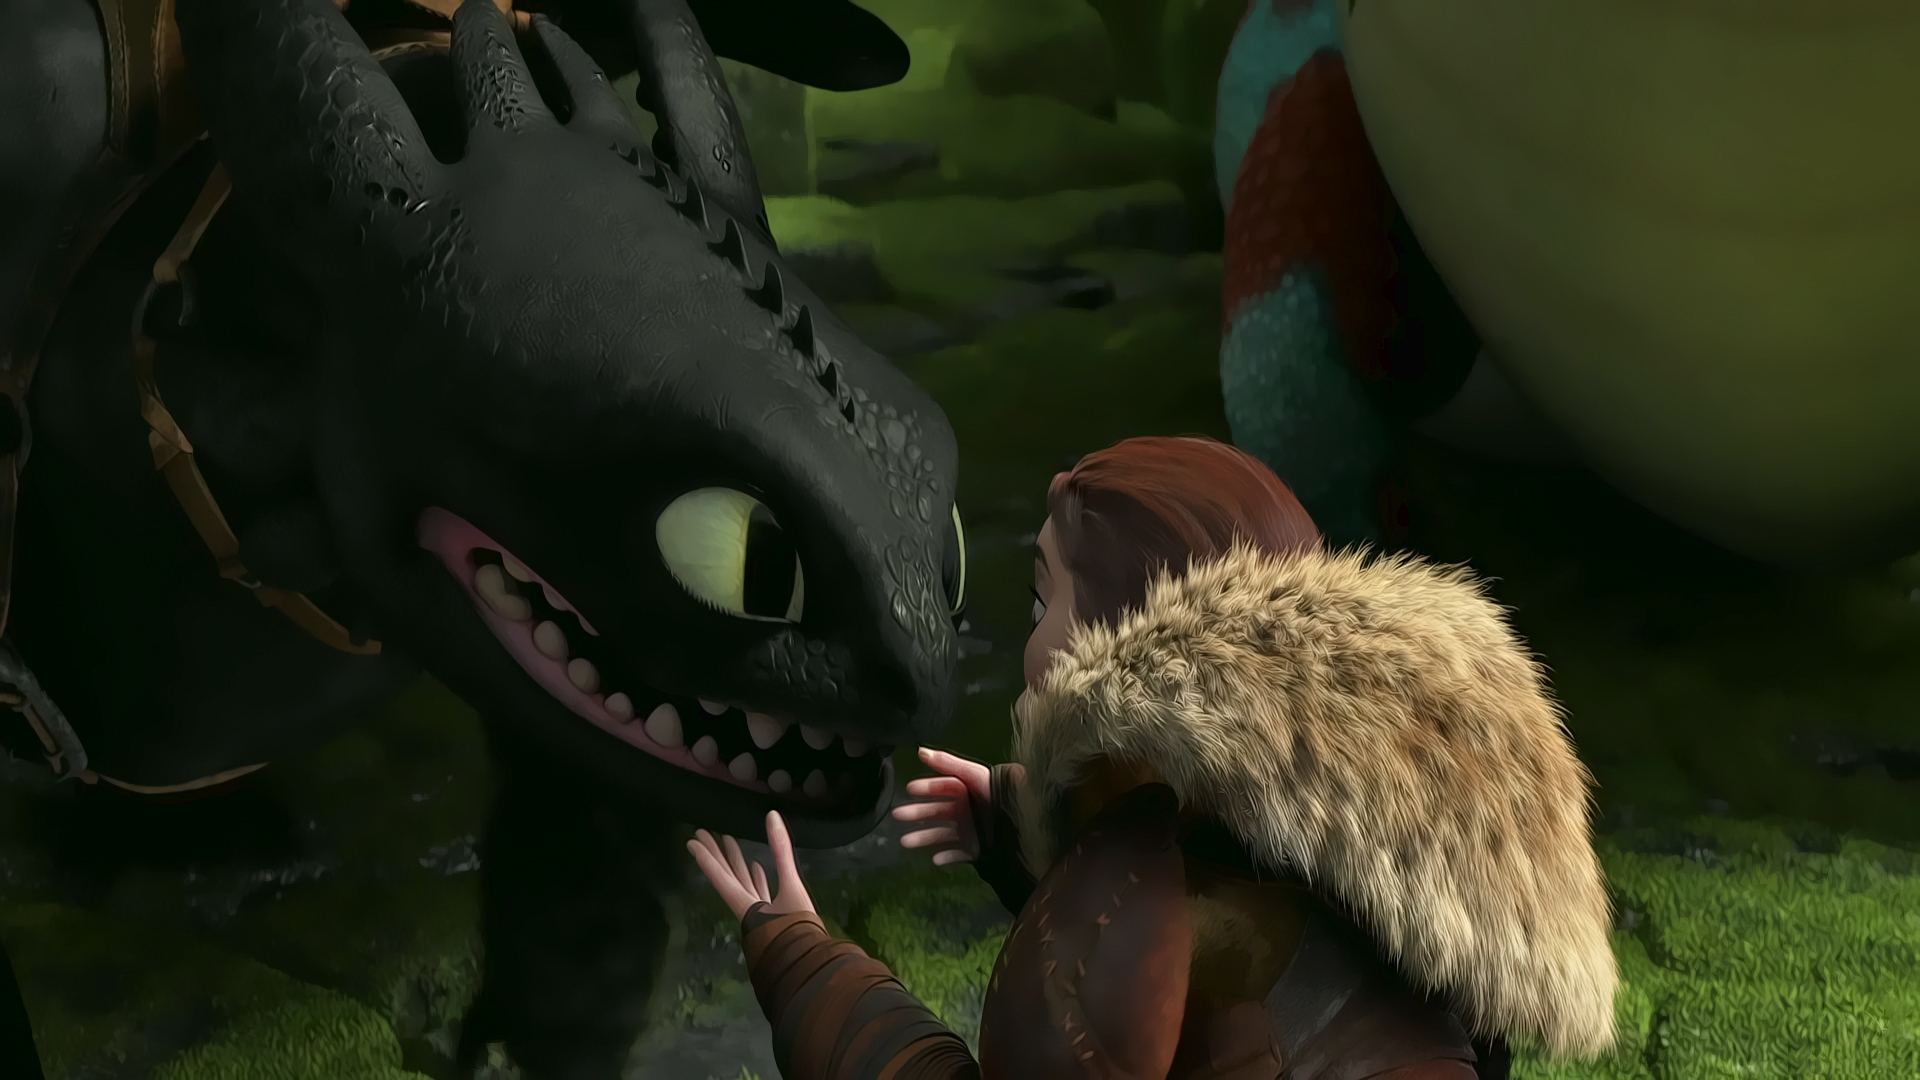 movie, how to train your dragon 2, toothless (how to train your dragon), valka (how to train your dragon), how to train your dragon